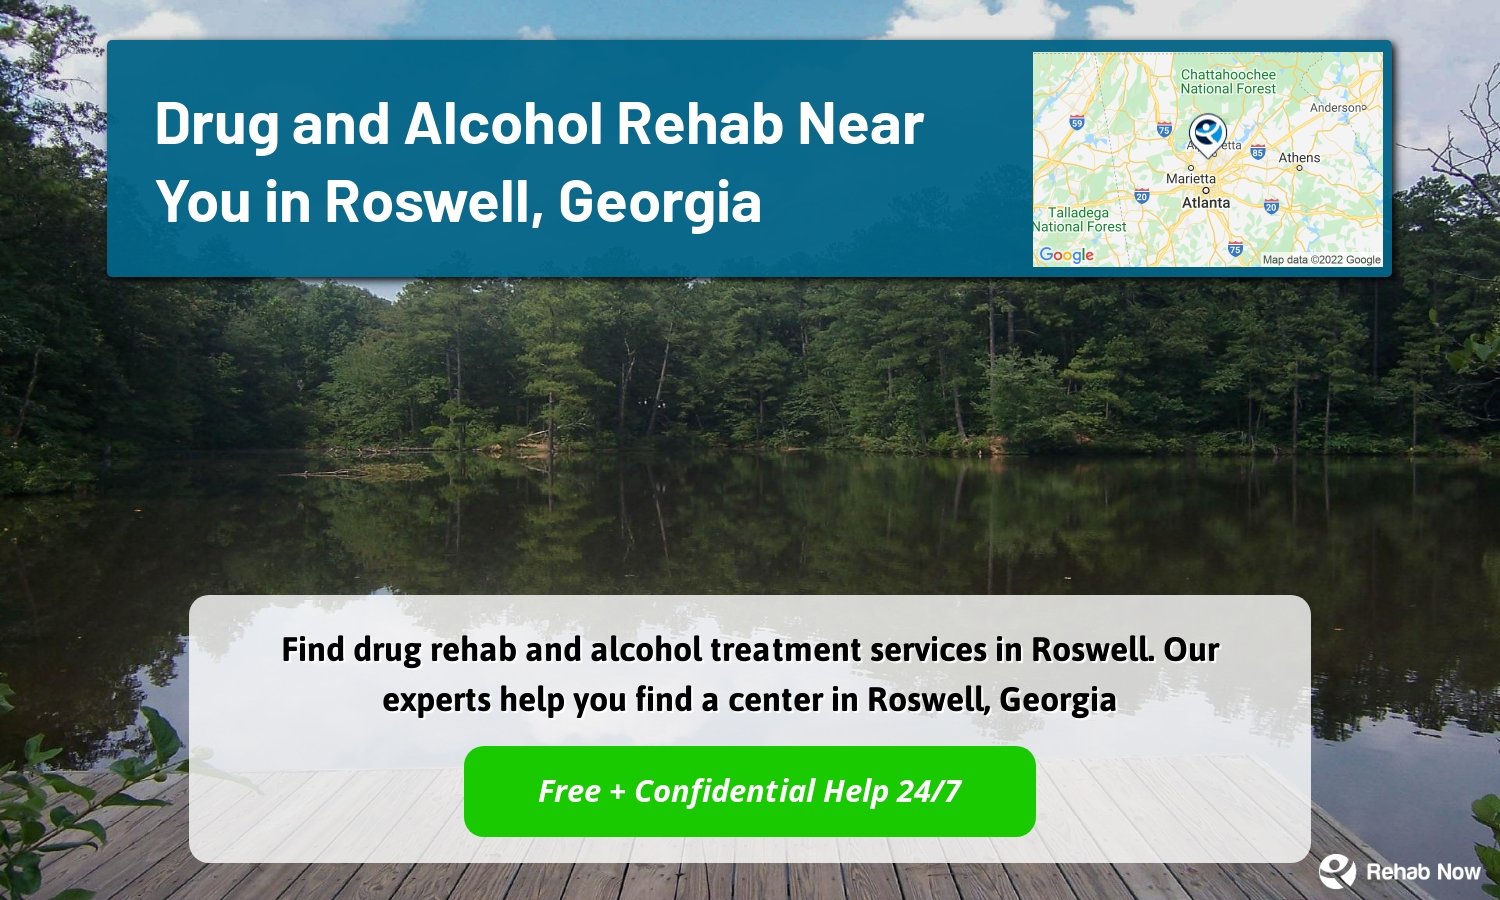 Find drug rehab and alcohol treatment services in Roswell. Our experts help you find a center in Roswell, Georgia